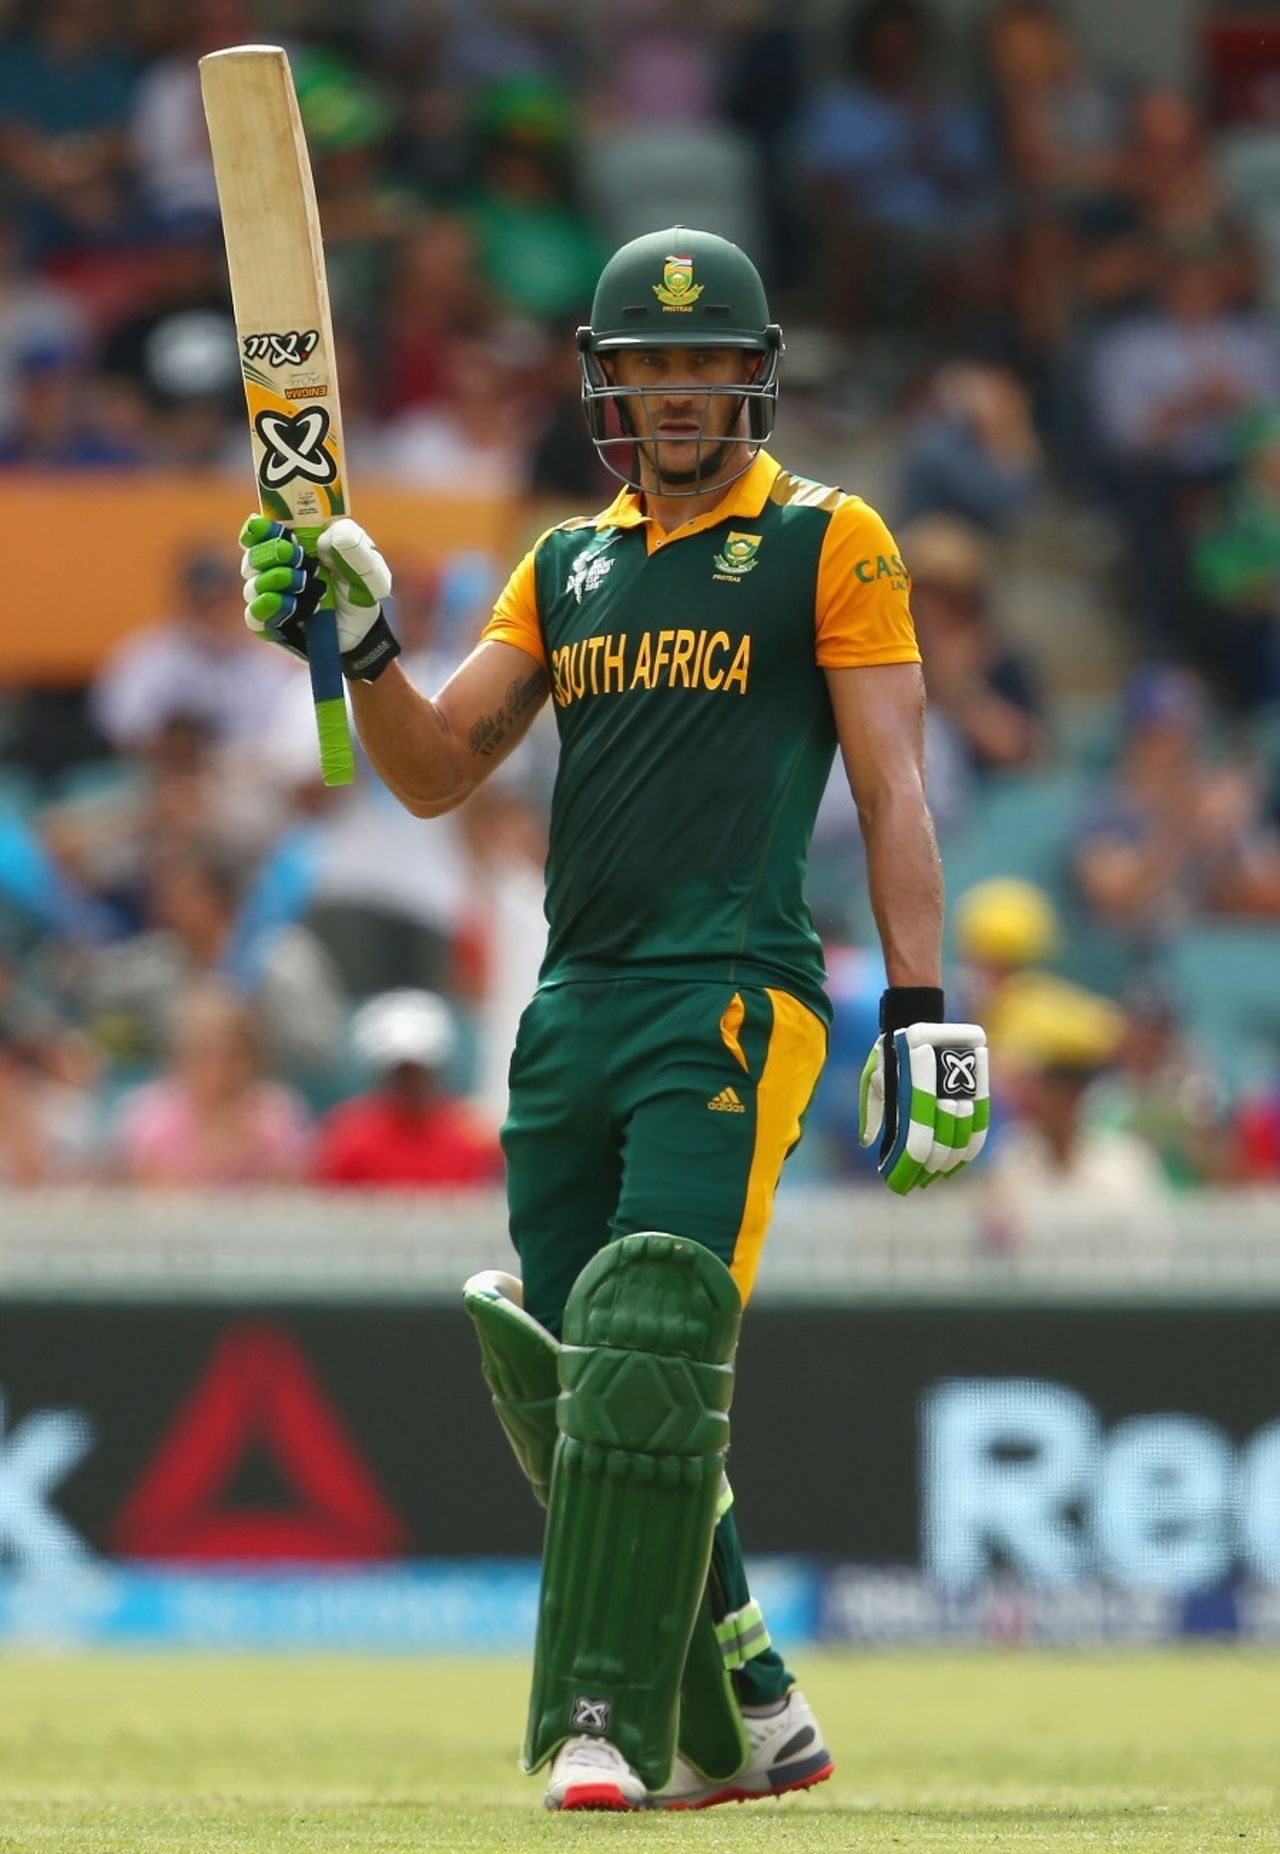 Faf du Plessis raises his bat after bringing up a fifty, Ireland v South Africa, World Cup 2015, Group B, Canberra, March 3, 2015